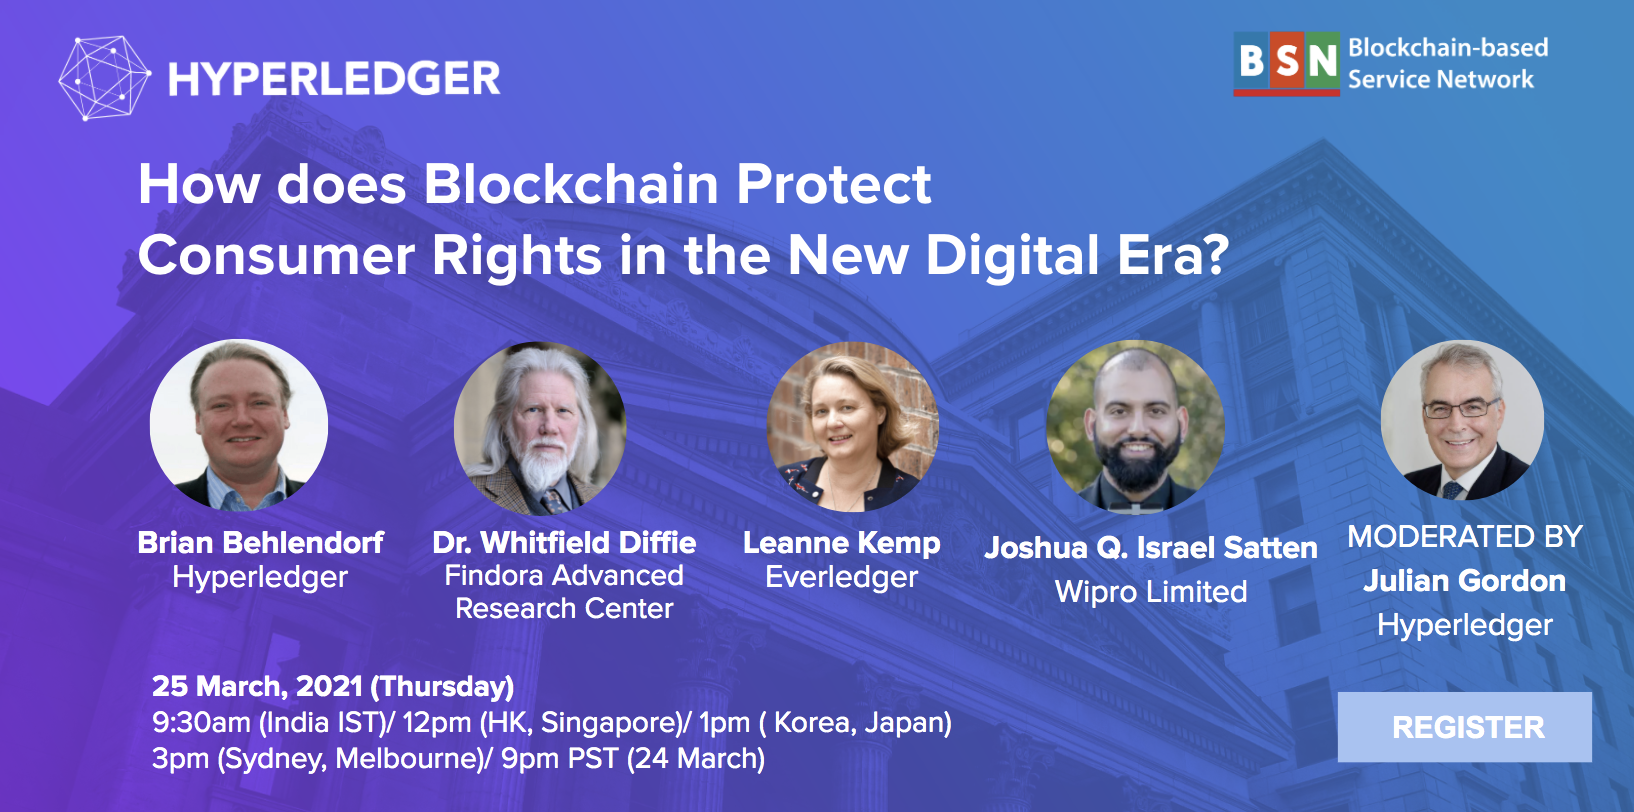 How does Blockchain Protect Consumer Rights in the New Digital Era